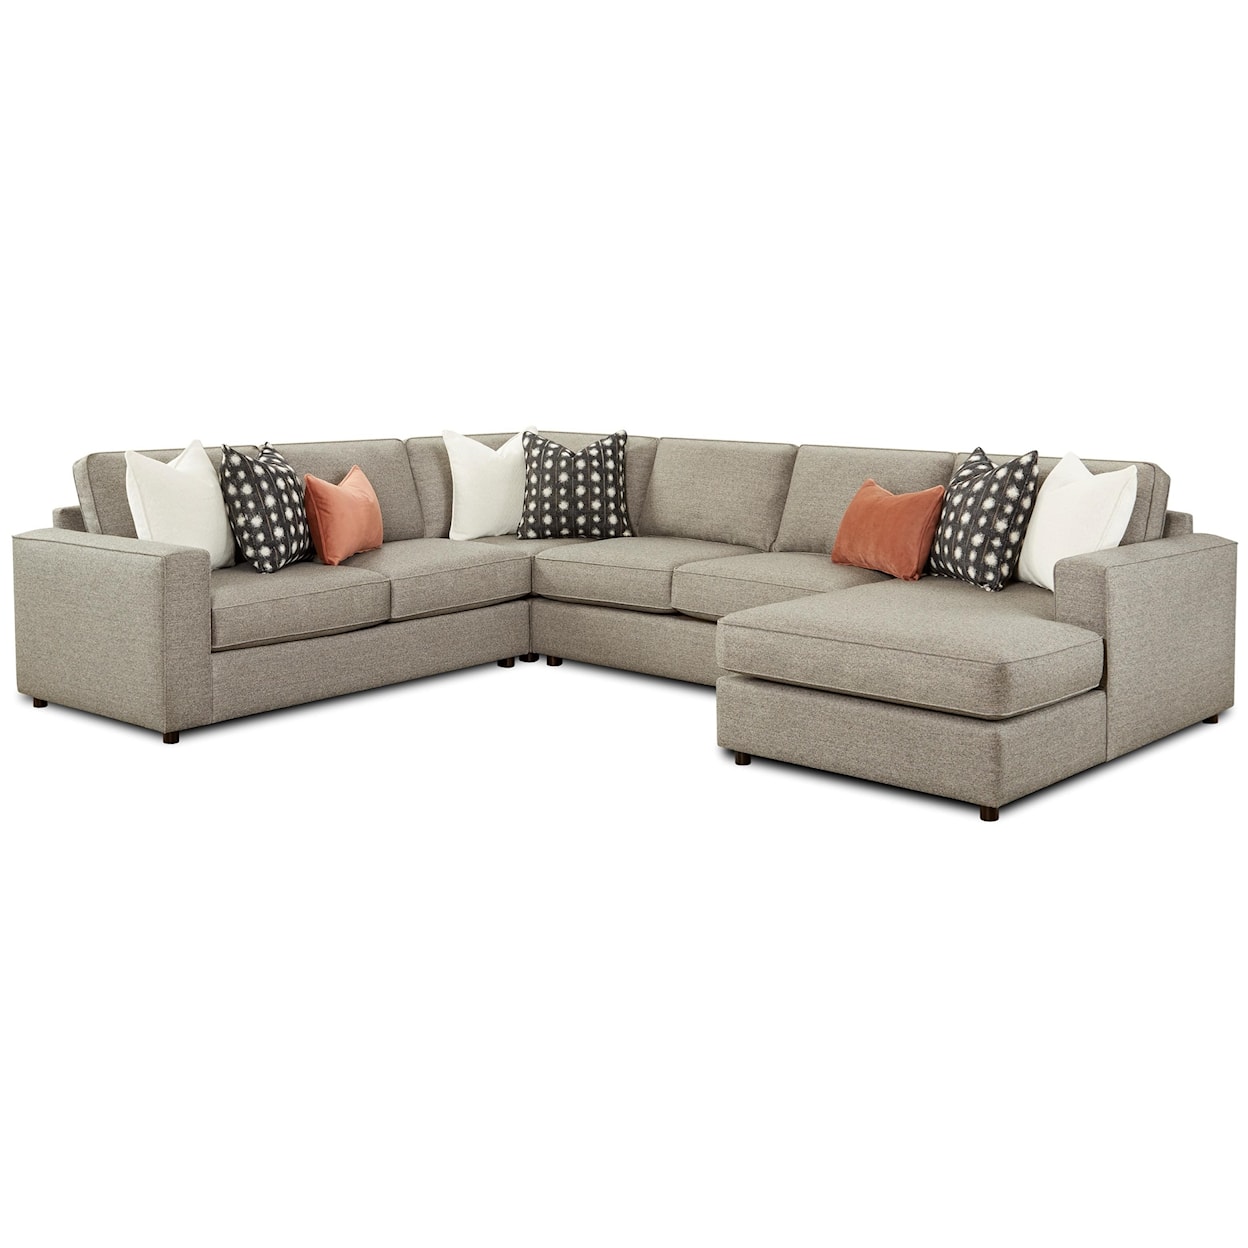 VFM Signature 2061 MONROE ASH 4-Piece Sectional with Chaise